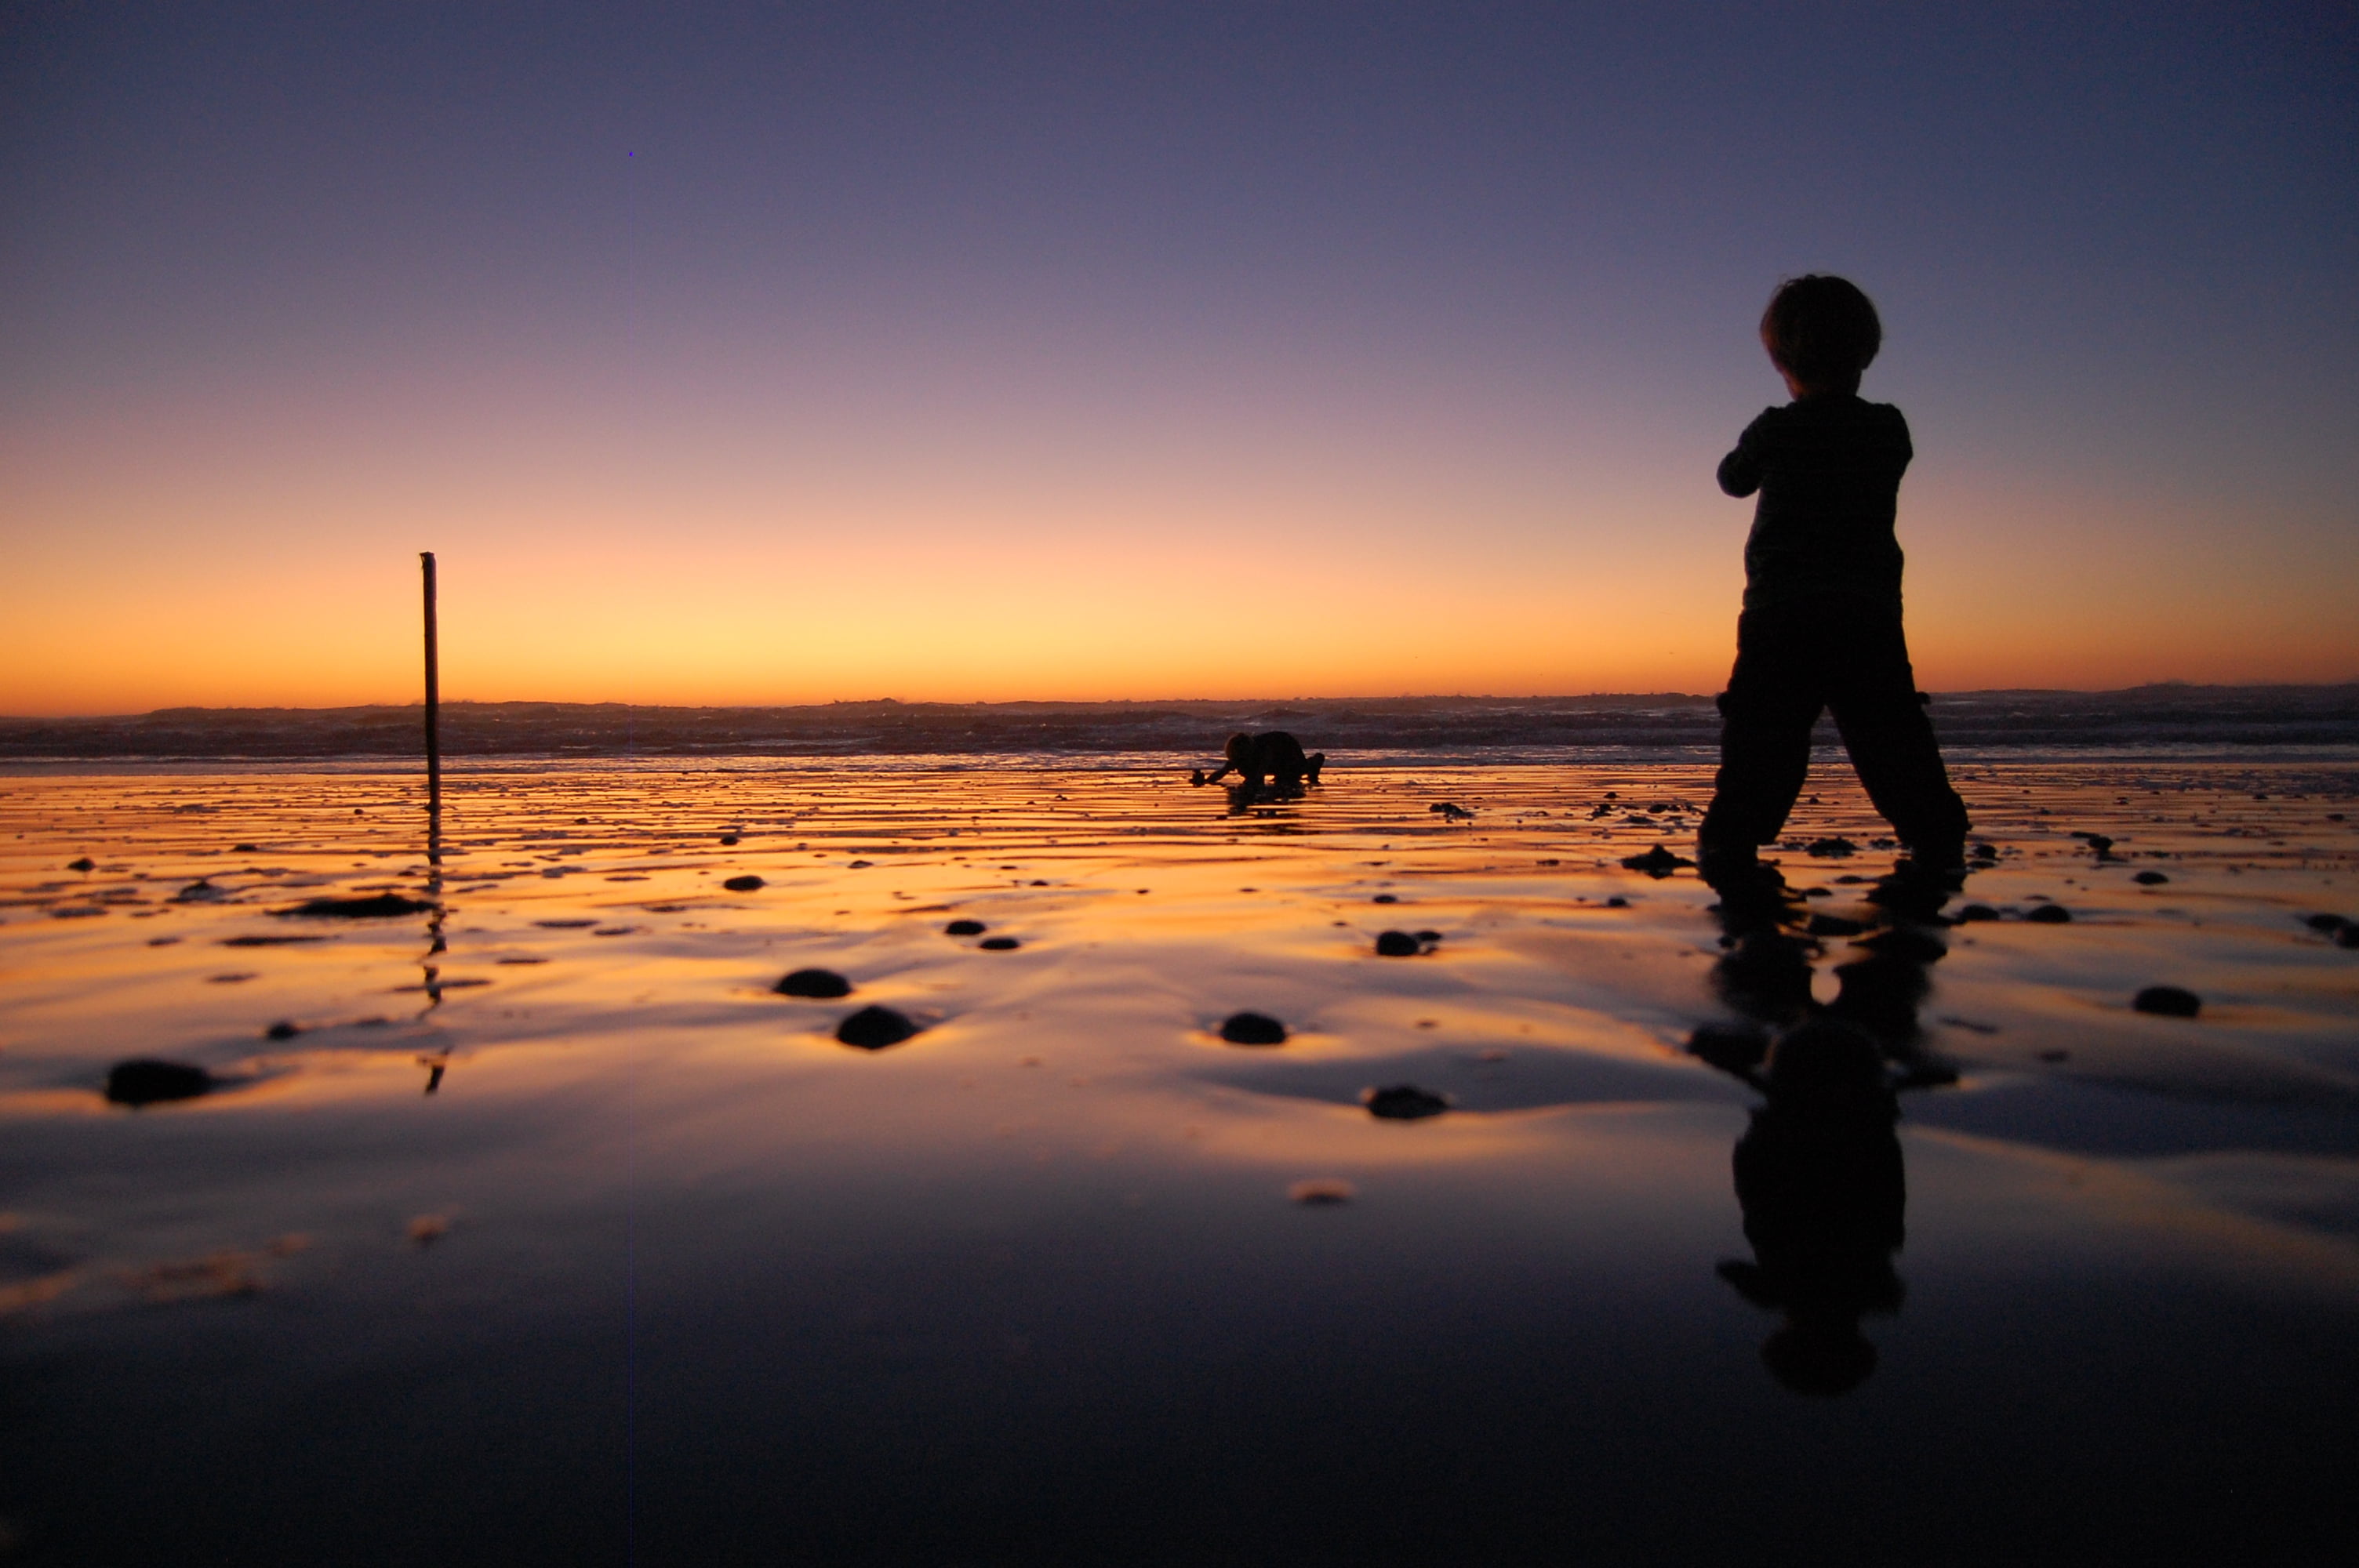 silhoutte photography of child on seashore during golden hour